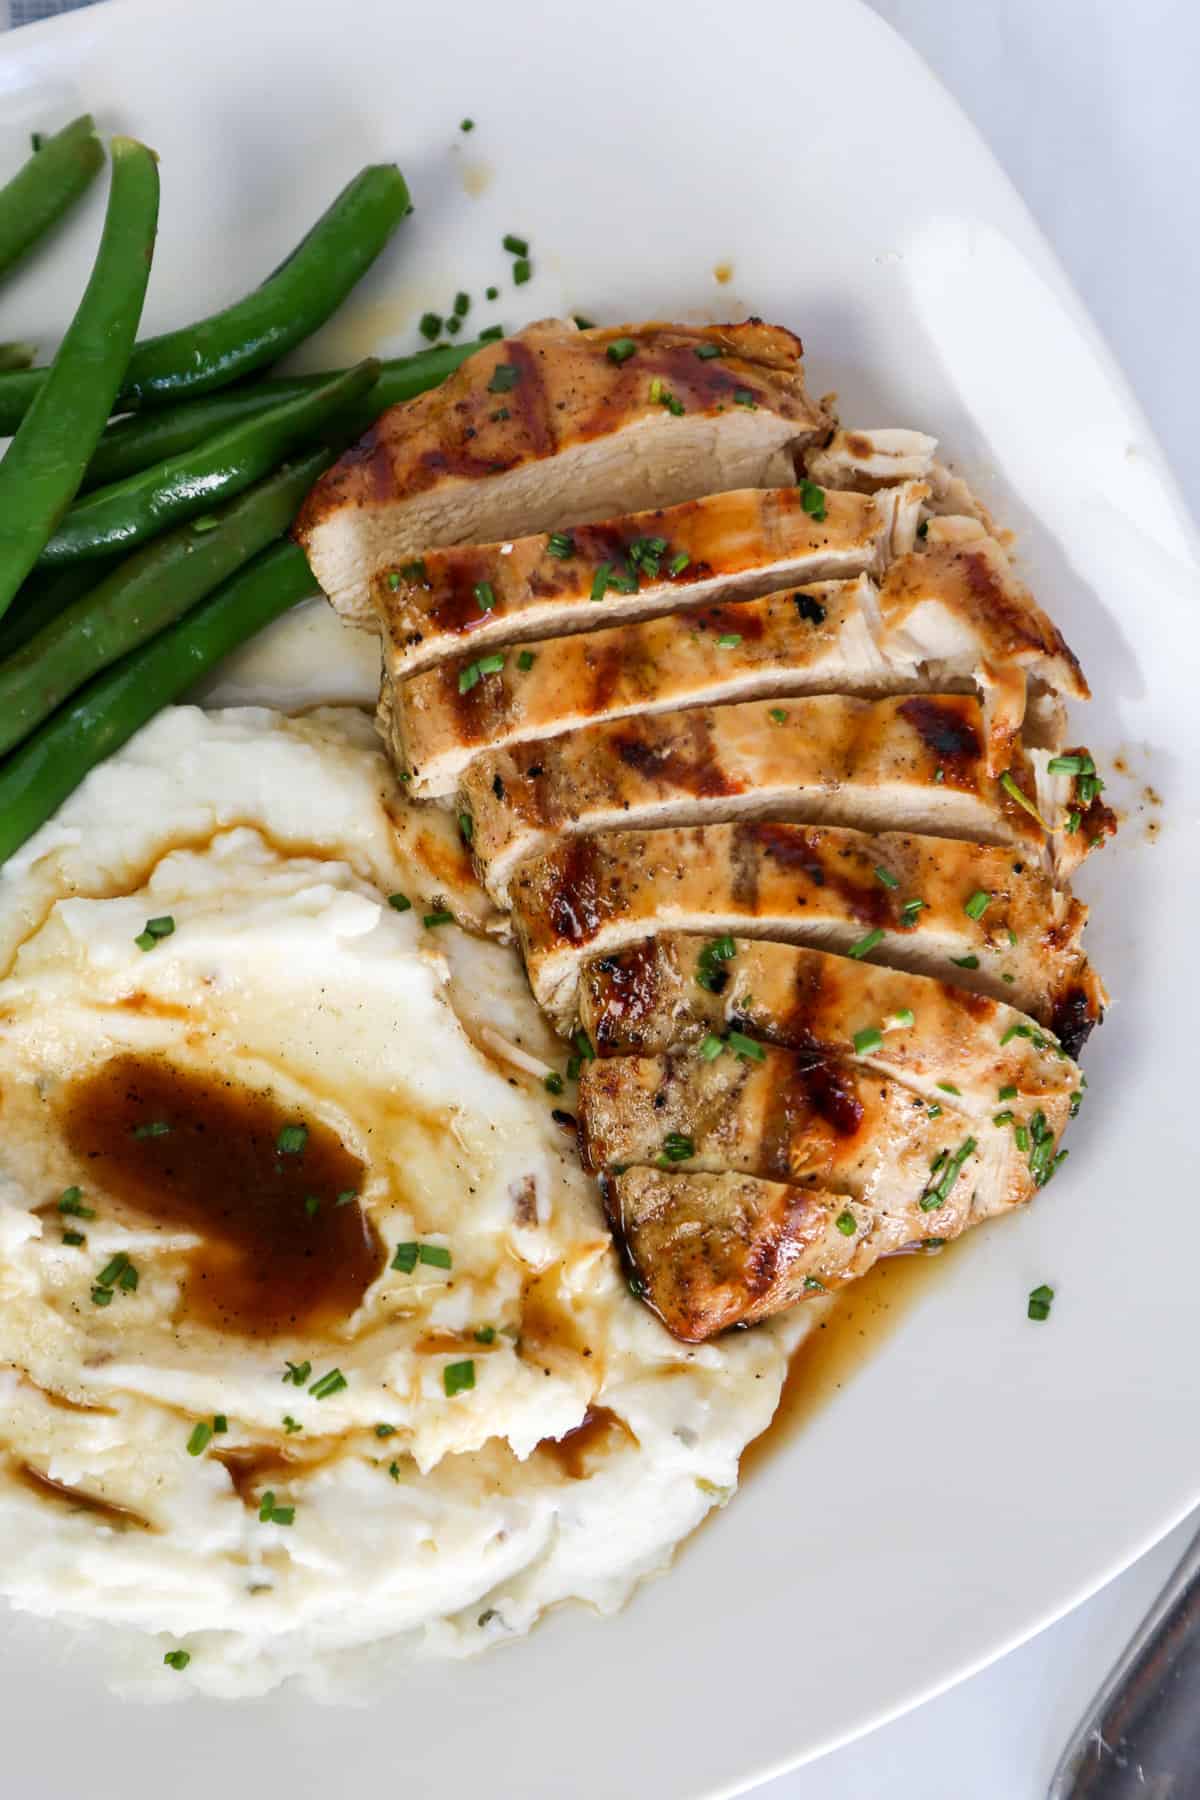 Grilled savory chicken breast sliced with mashed potatoes and green beans on a plate.